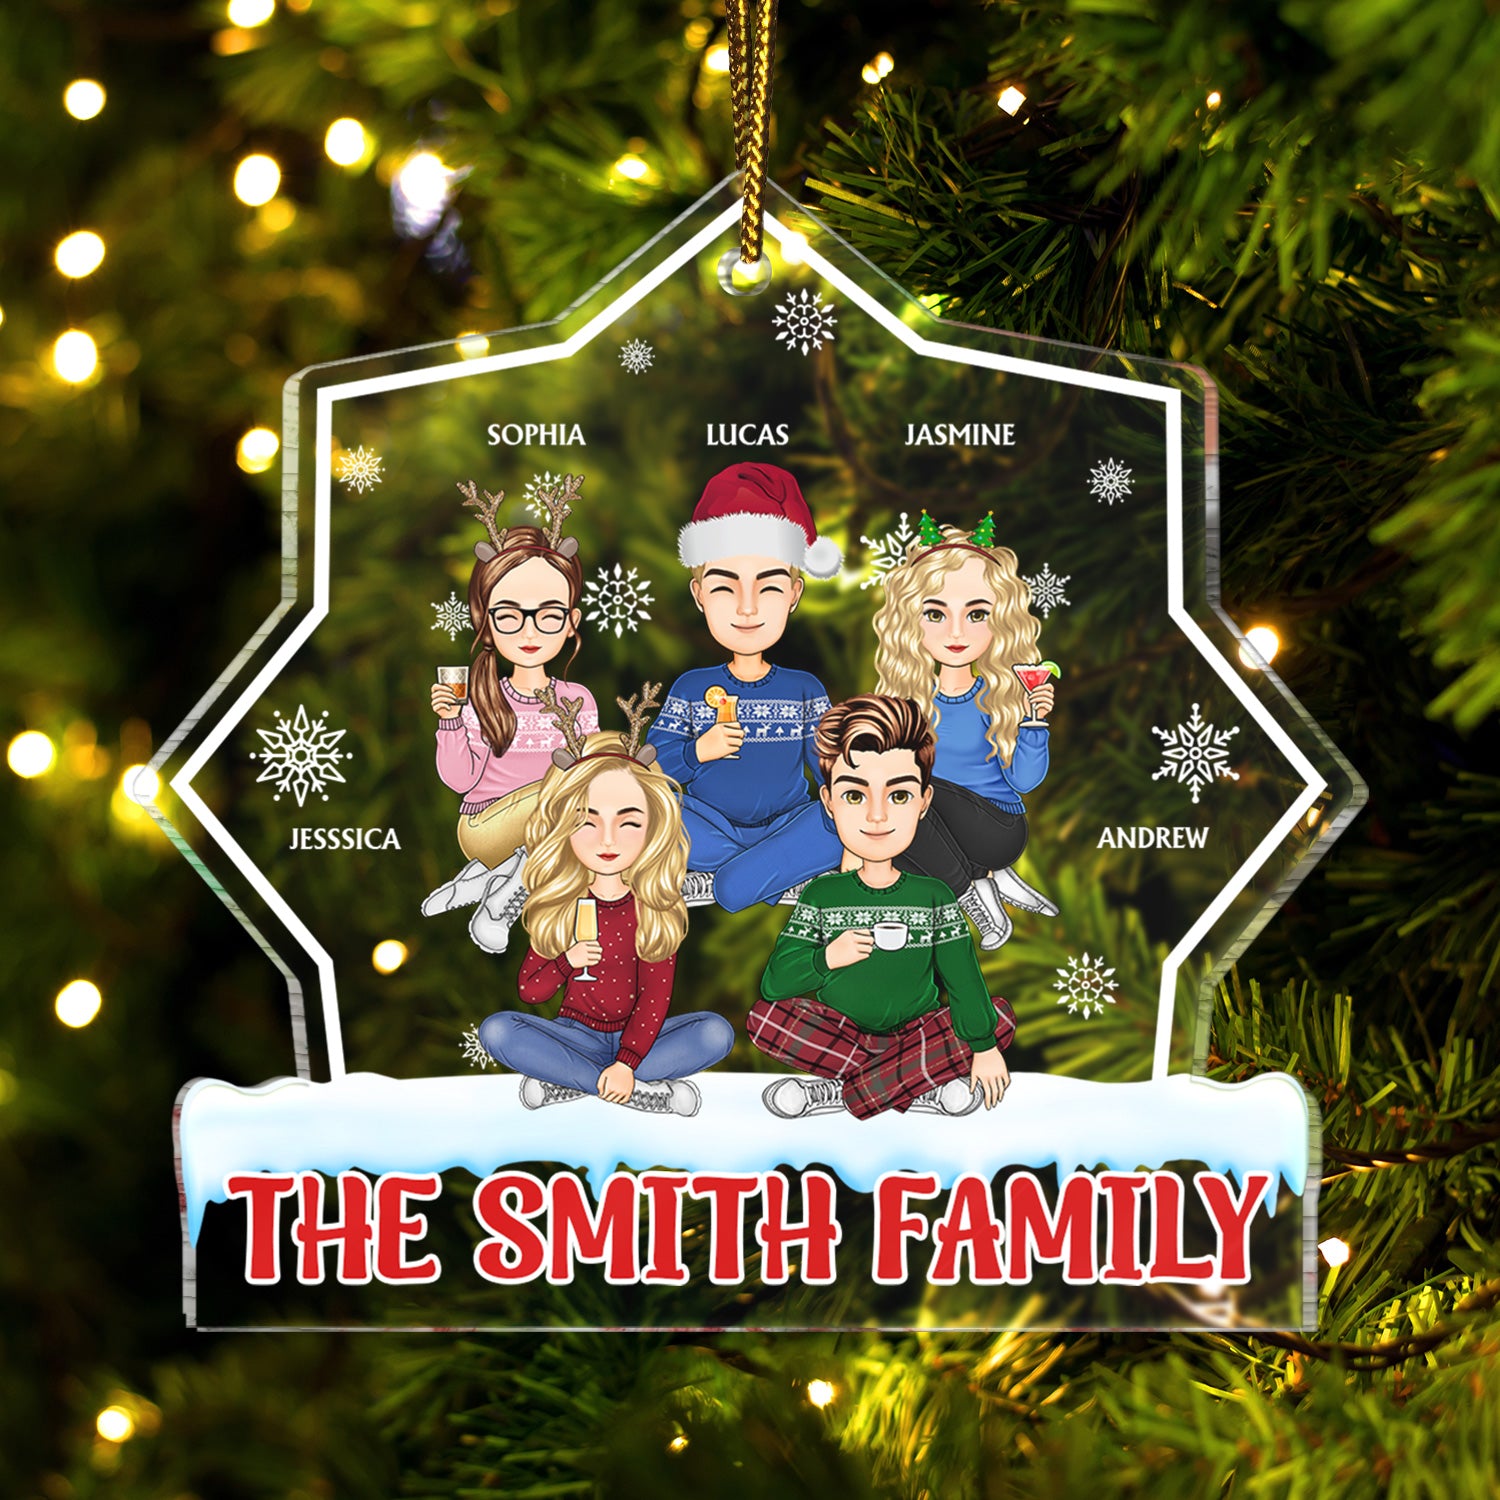 Cartoon Style - Christmas Gift For Family, Friends - Personalized Custom Shaped Acrylic Ornament